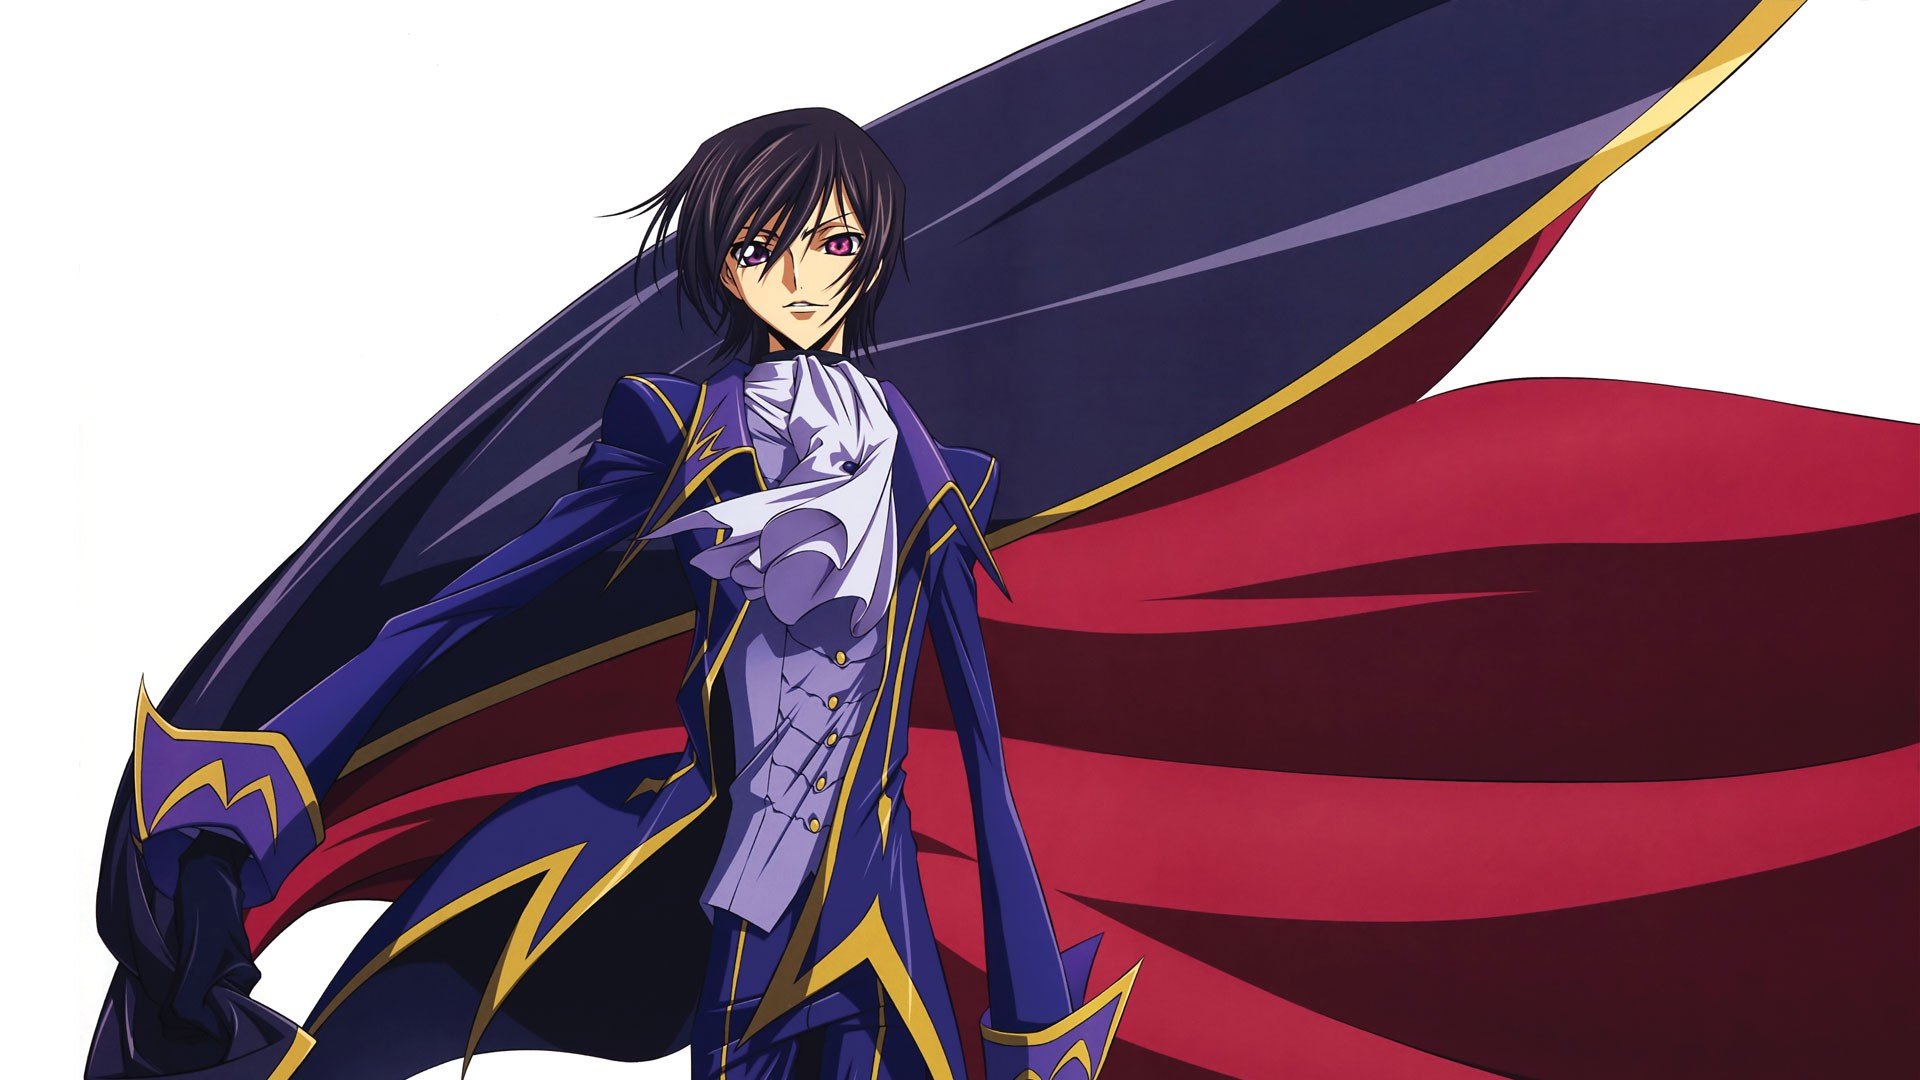 Code Geass Lamperouge Lelouch Zero Anime Wallpapers Hd Desktop And Mobile Backgrounds